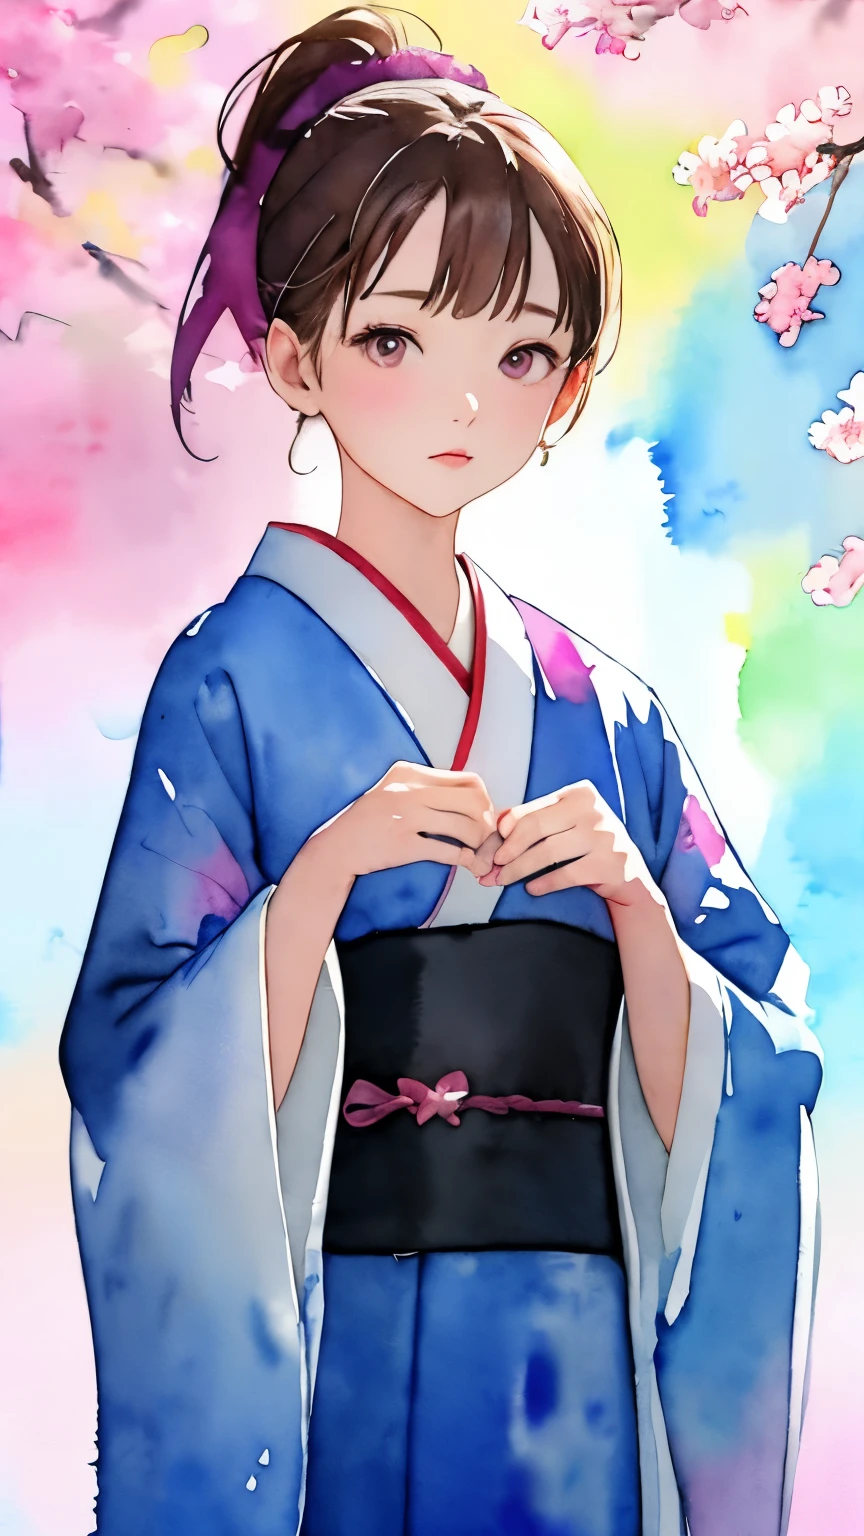 (((Bright colored watercolor style background:1.3)))、one girl、１６talent、anatomy、small face、small、small鼻、Pale pink eyes、Loosely braided low ponytail、brown hair、small breasts、Beautiful kimono、yamato nadeshiko、random pose、Yoshino cherry tree、beautiful cherry blossoms、highest quality、High resolution、High resolution、cinematic lighting、professional photographer